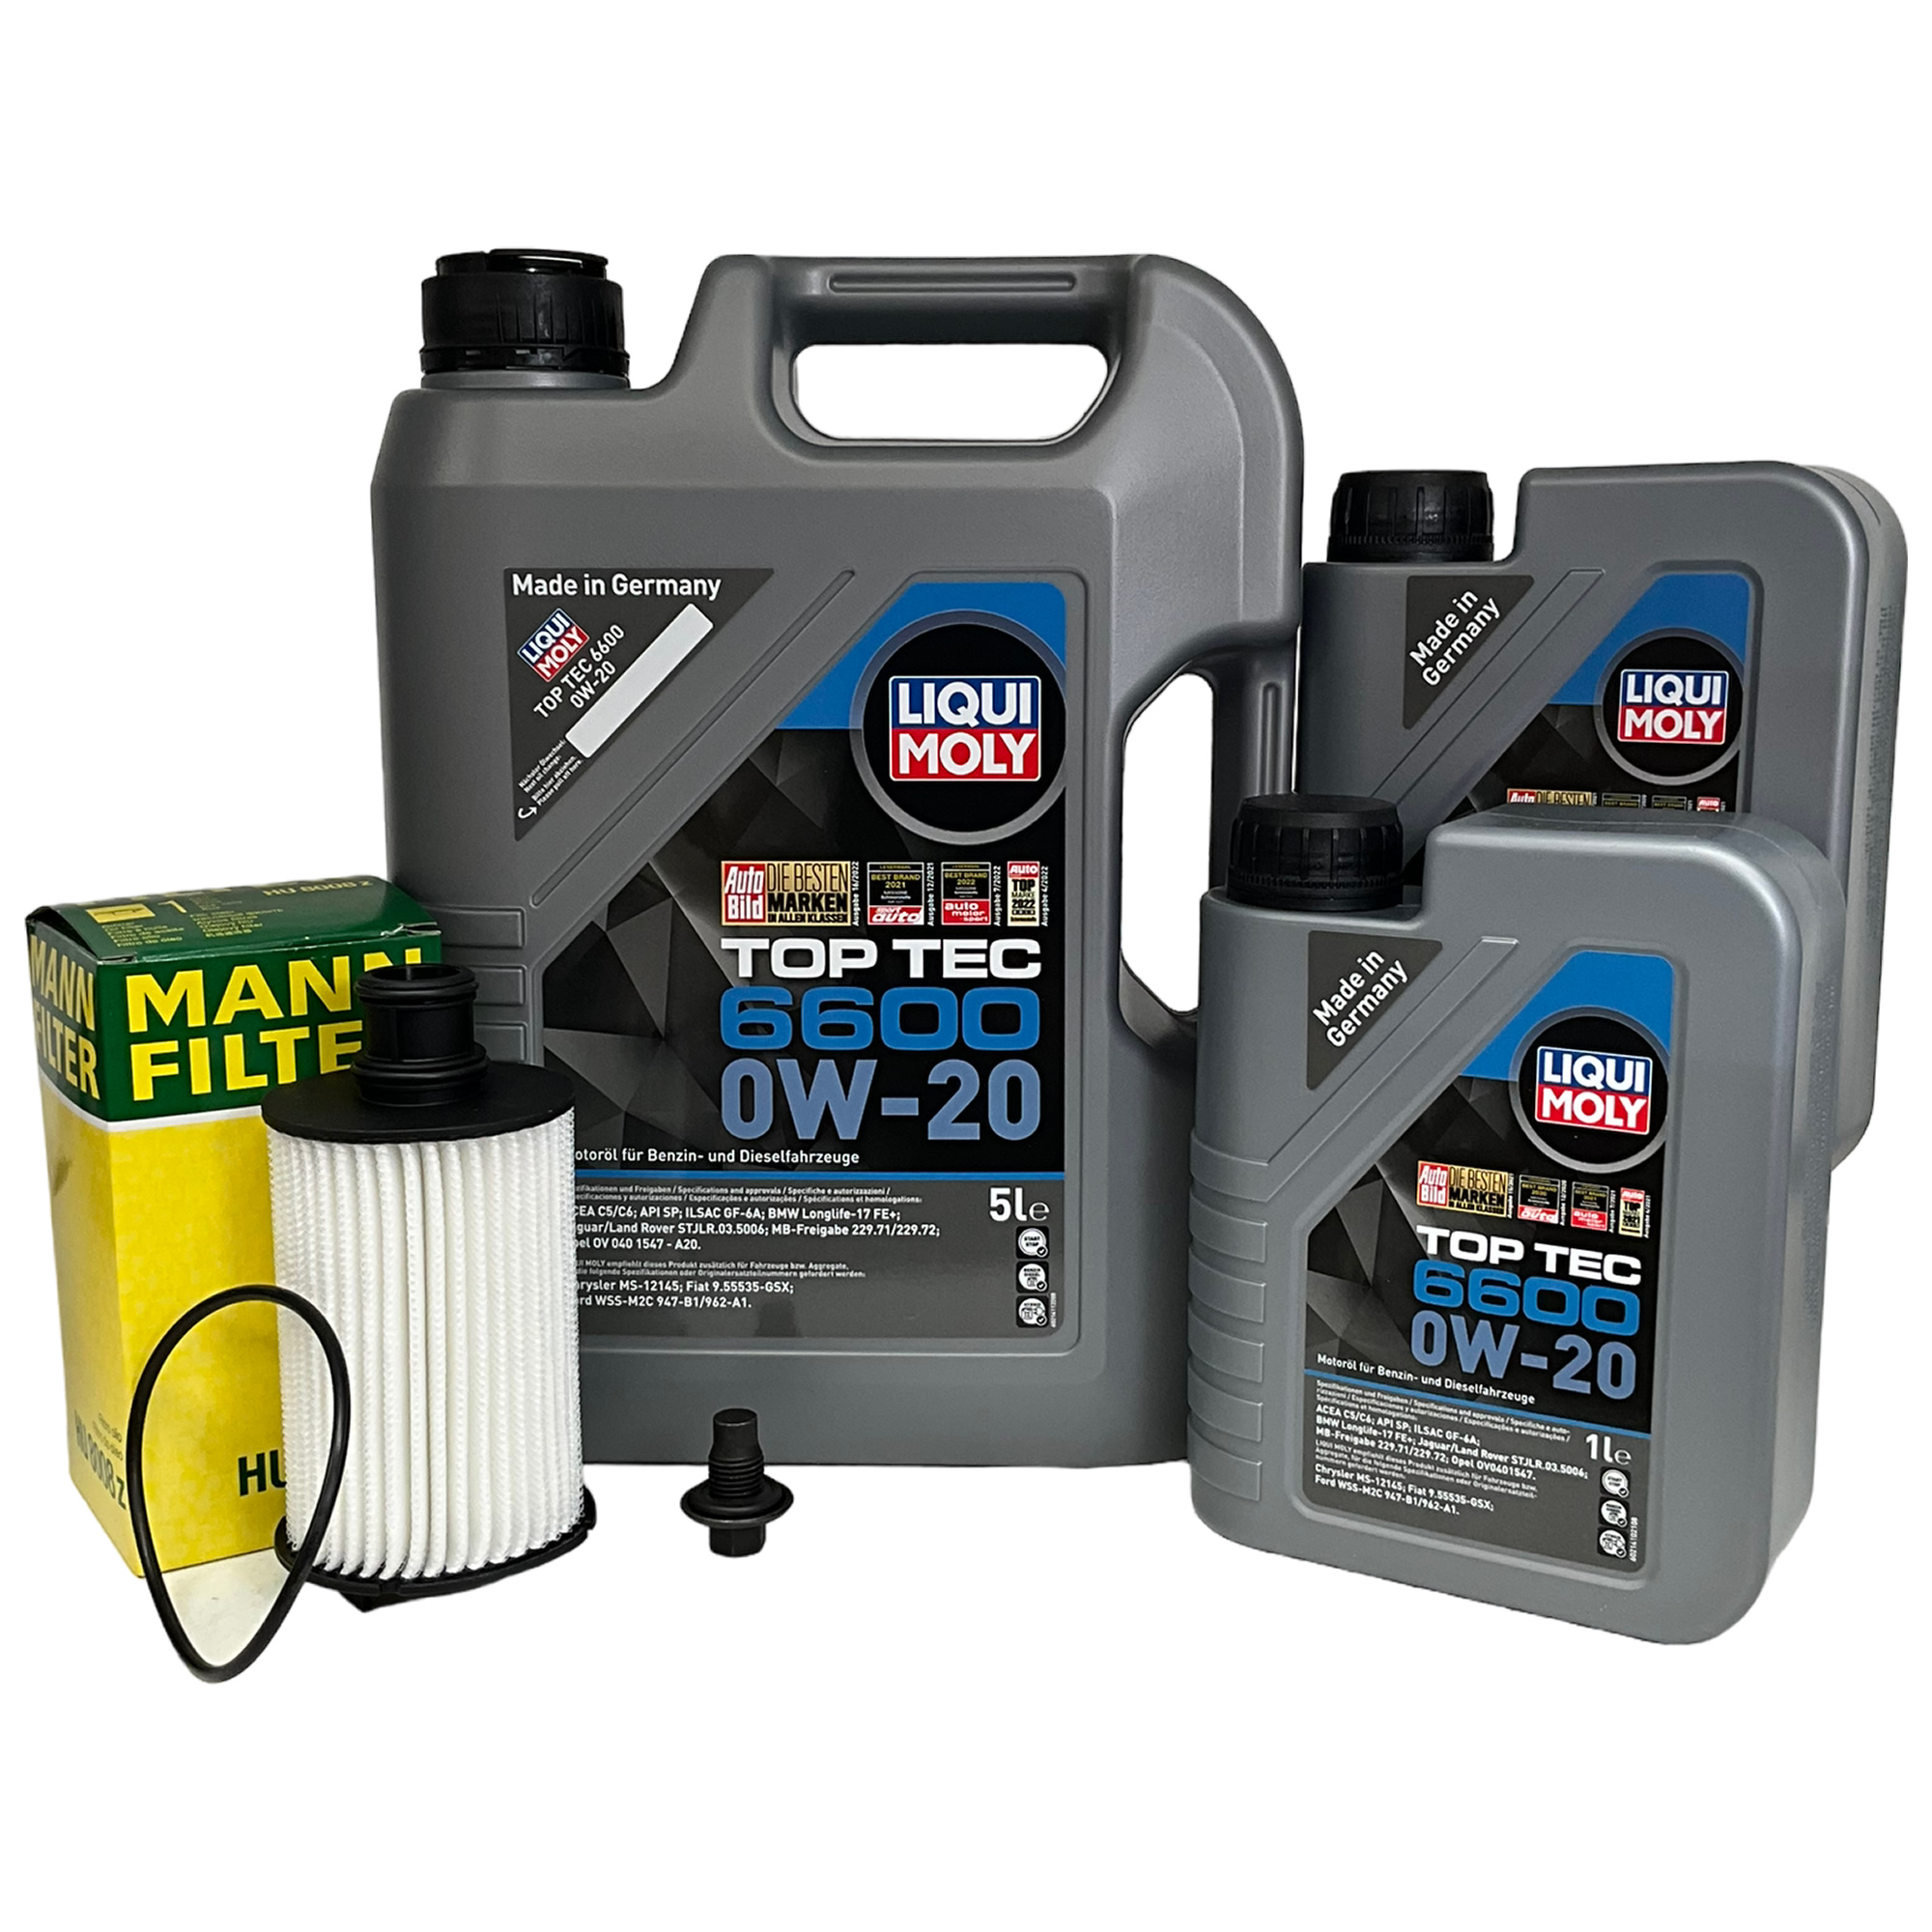 Jaguar F-Type V8 5 Litre service kit with Liqui Moly Top Tec 6600 0W-20 Engine Oil and Mann Oil Filter